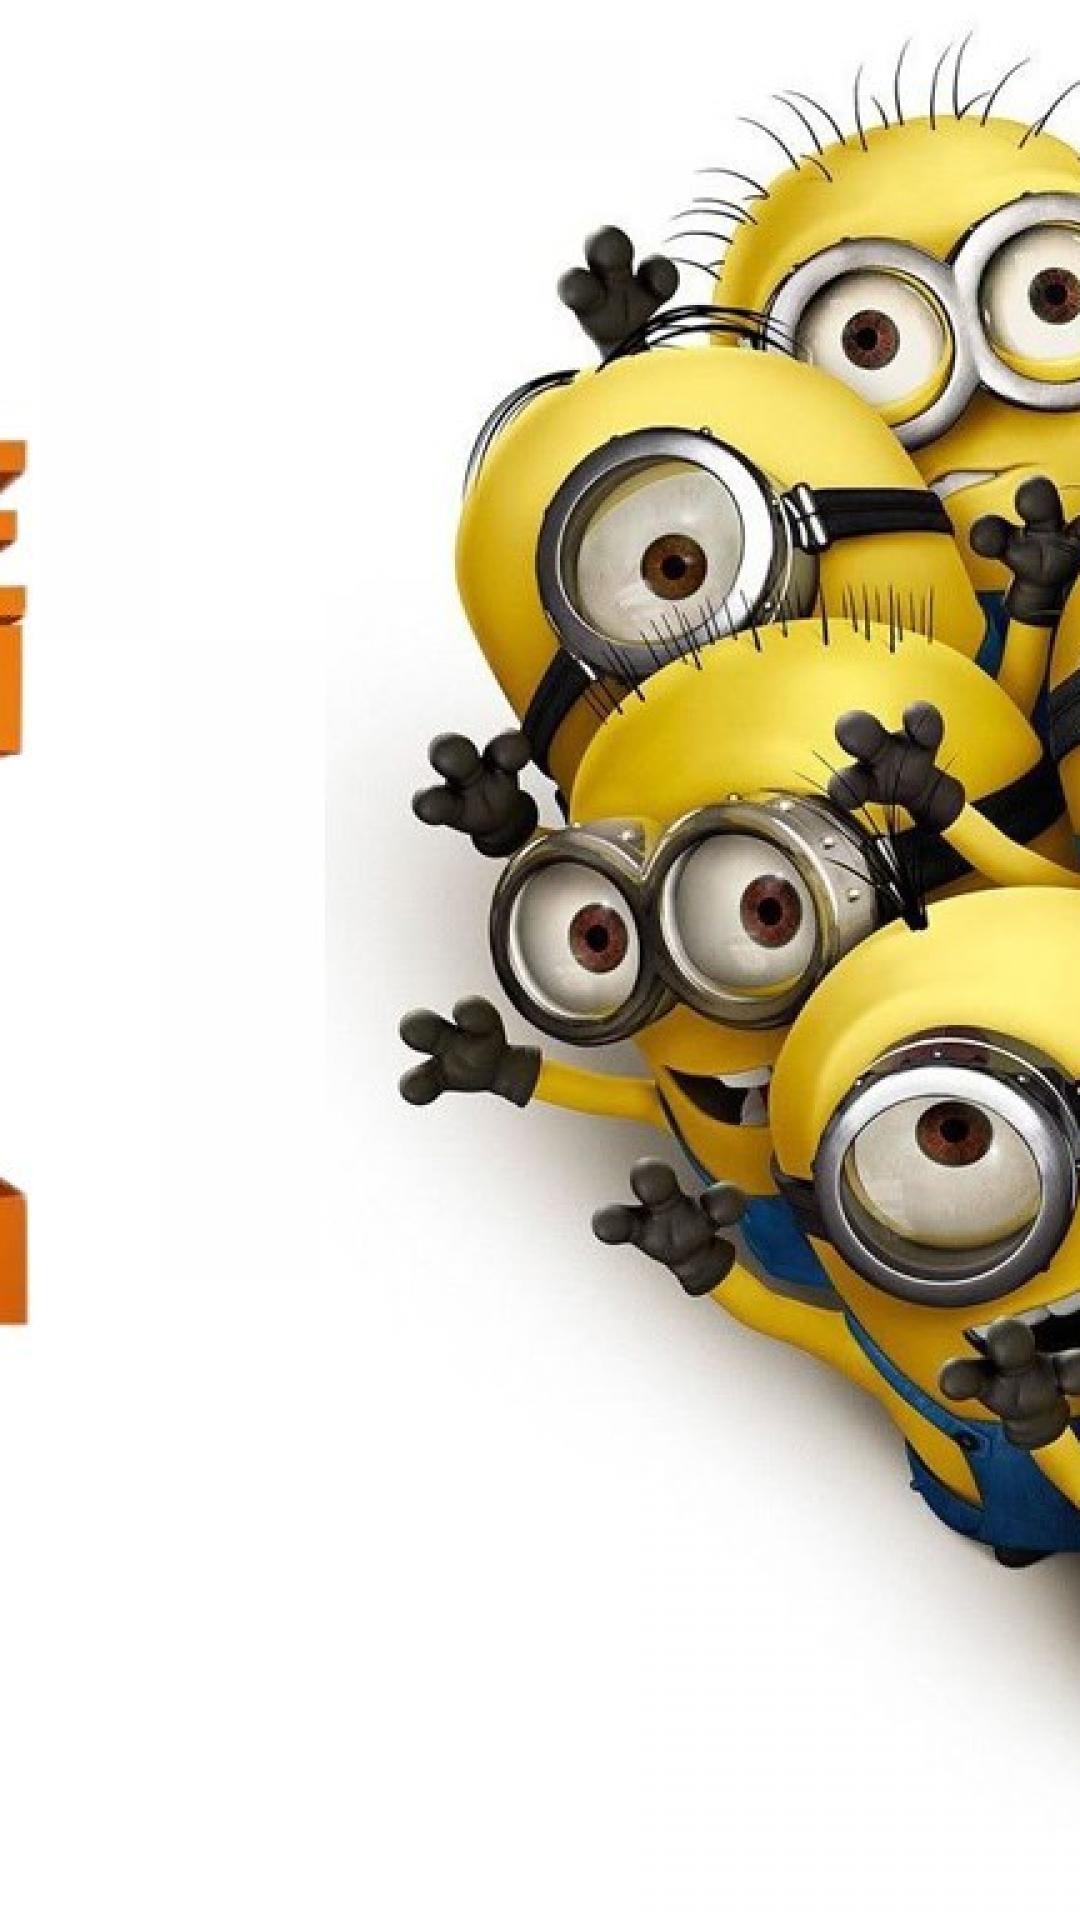 Hd Wallpapers Of Minions - Wallpaper Cave